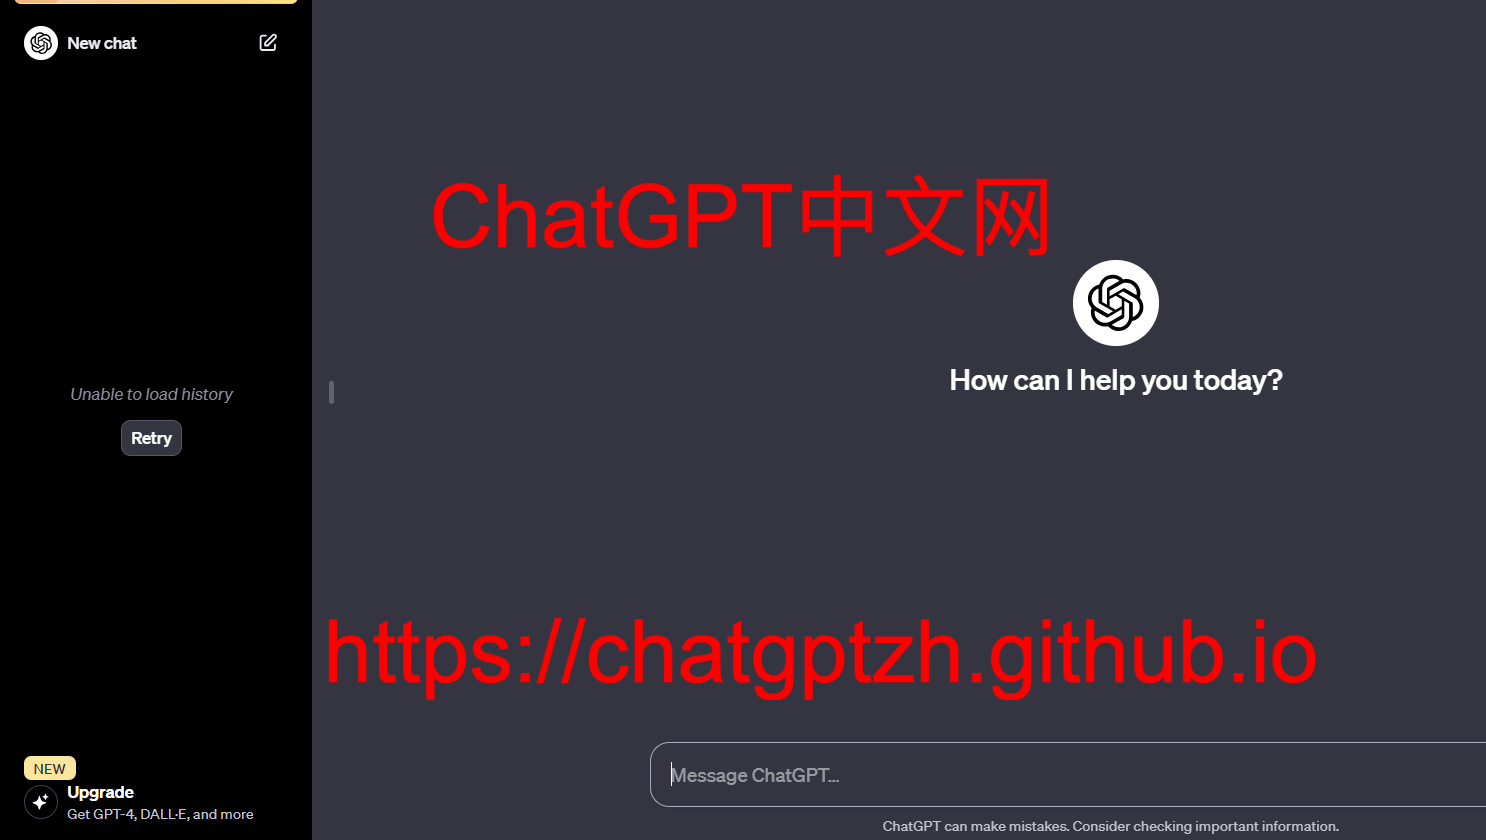 ChatGPT unable to load history